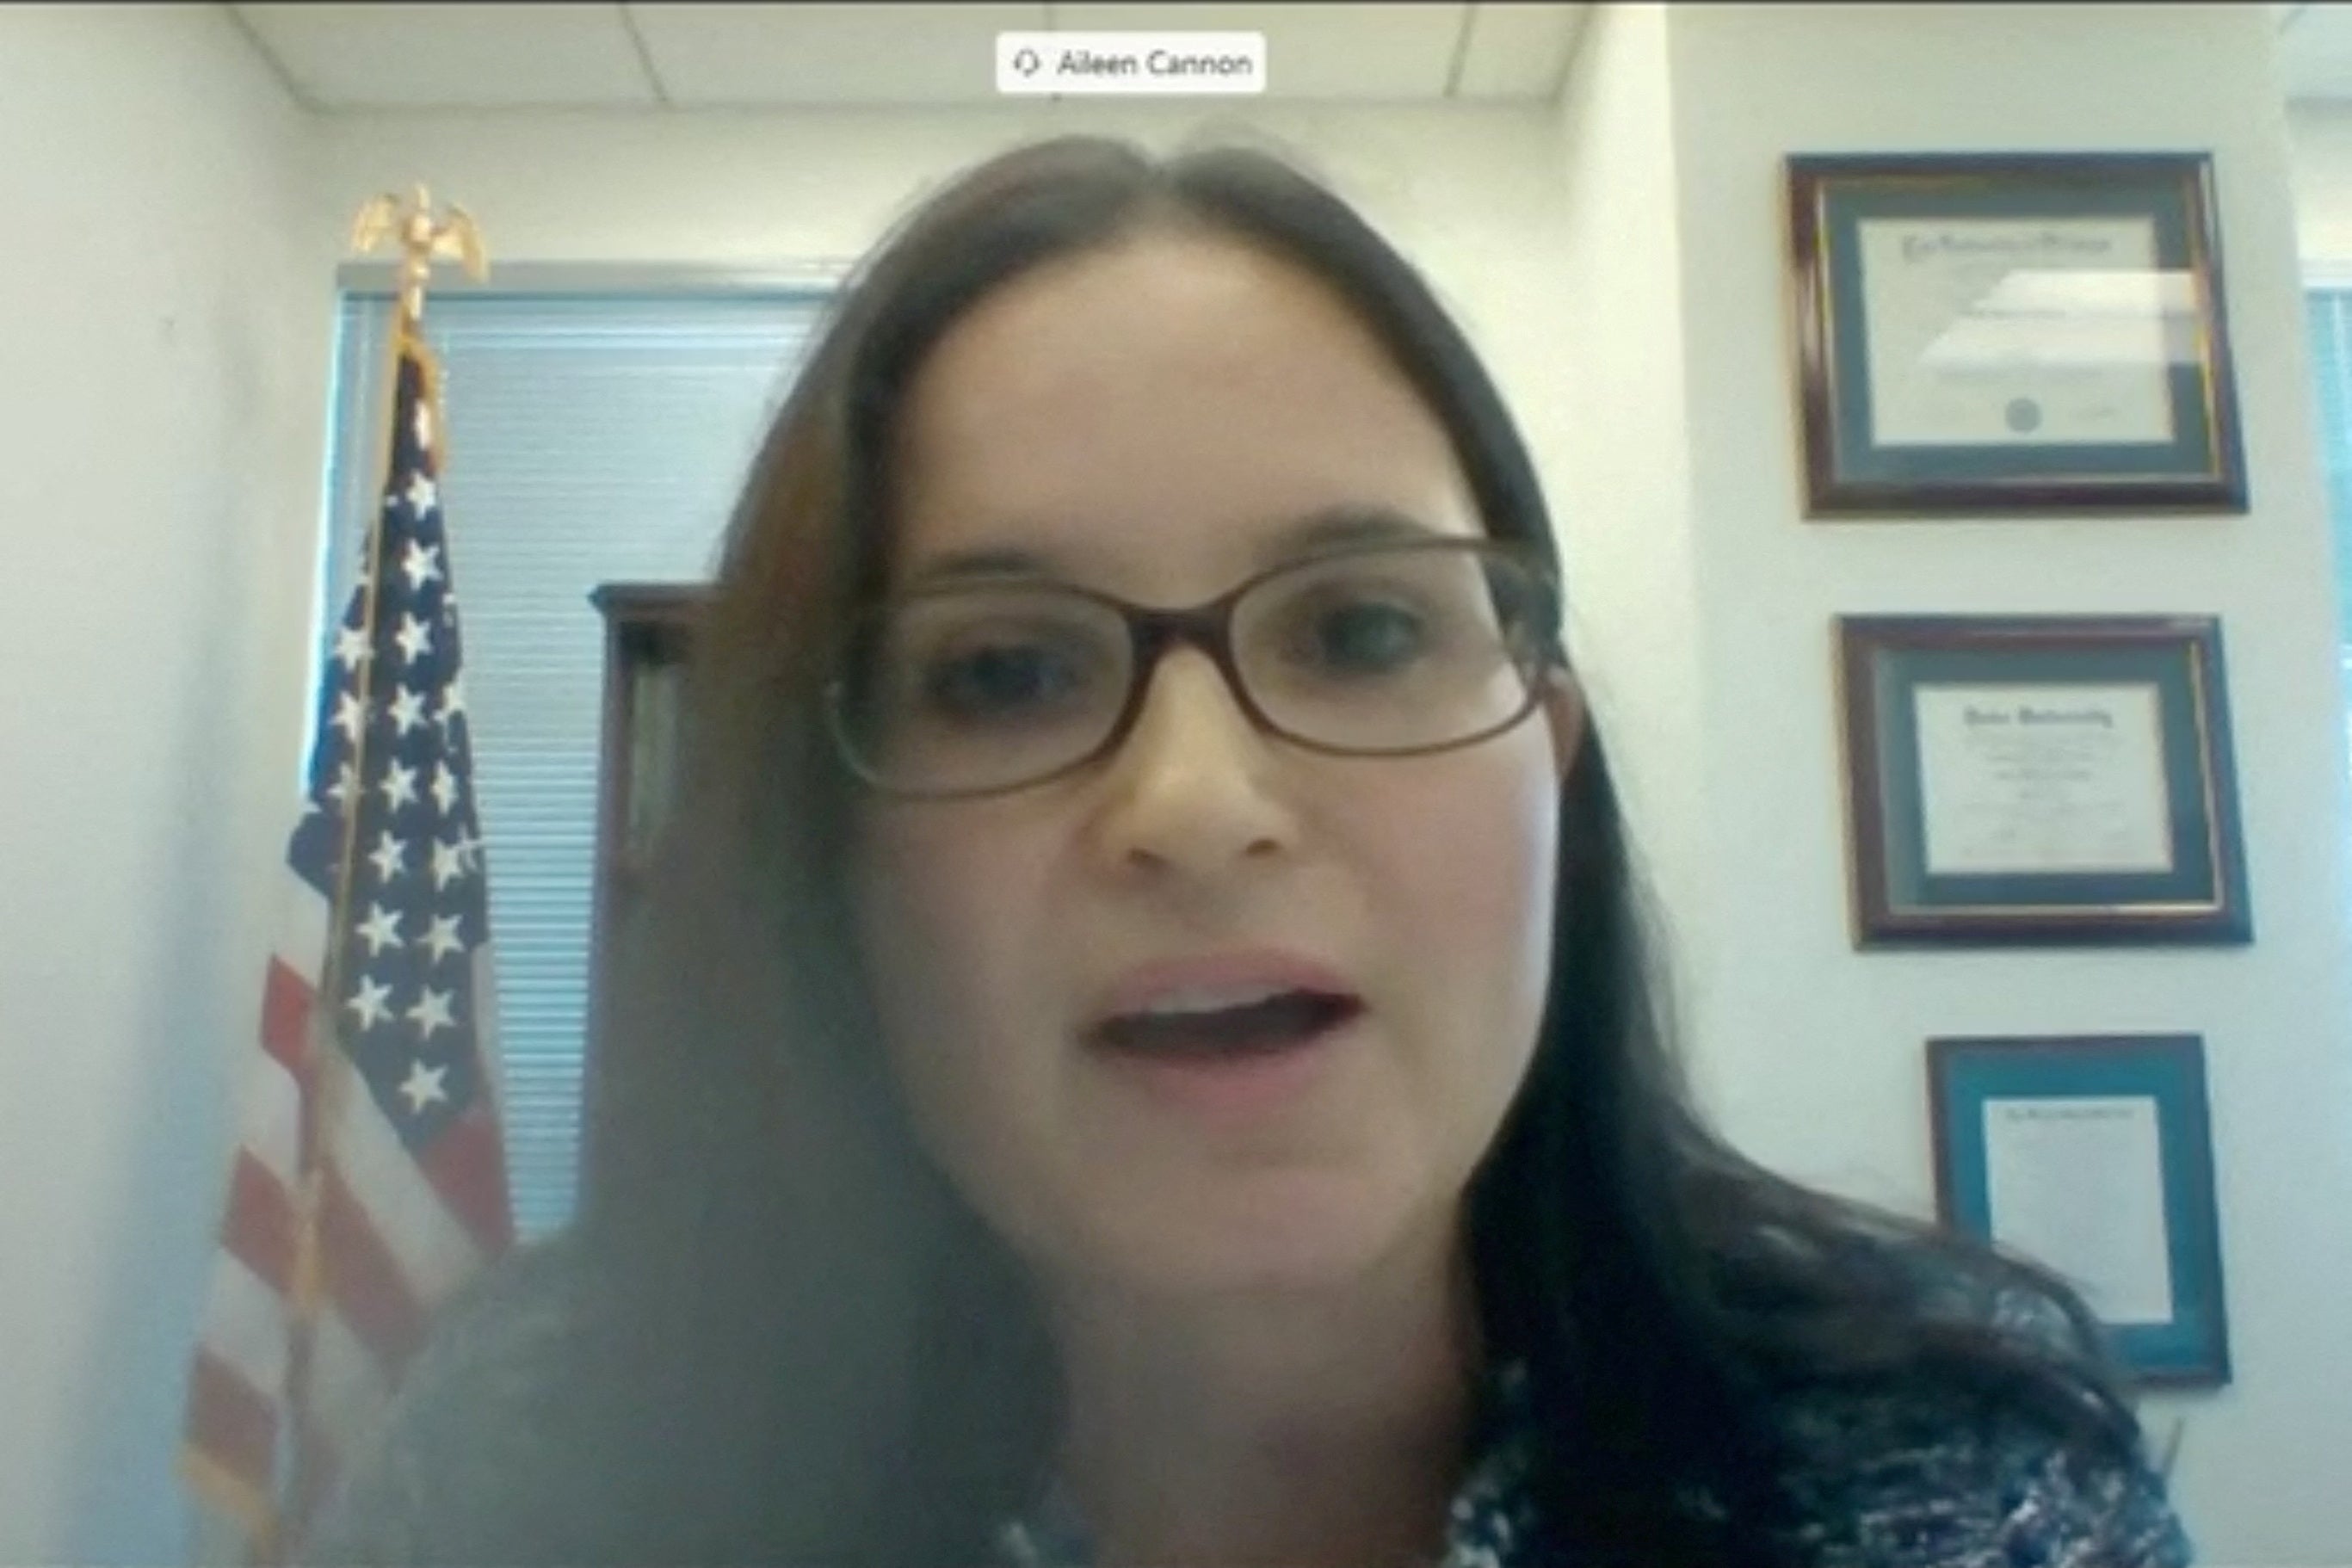 US District Judge Aileen Cannon during her virtual Senate nomination hearing in 2020.